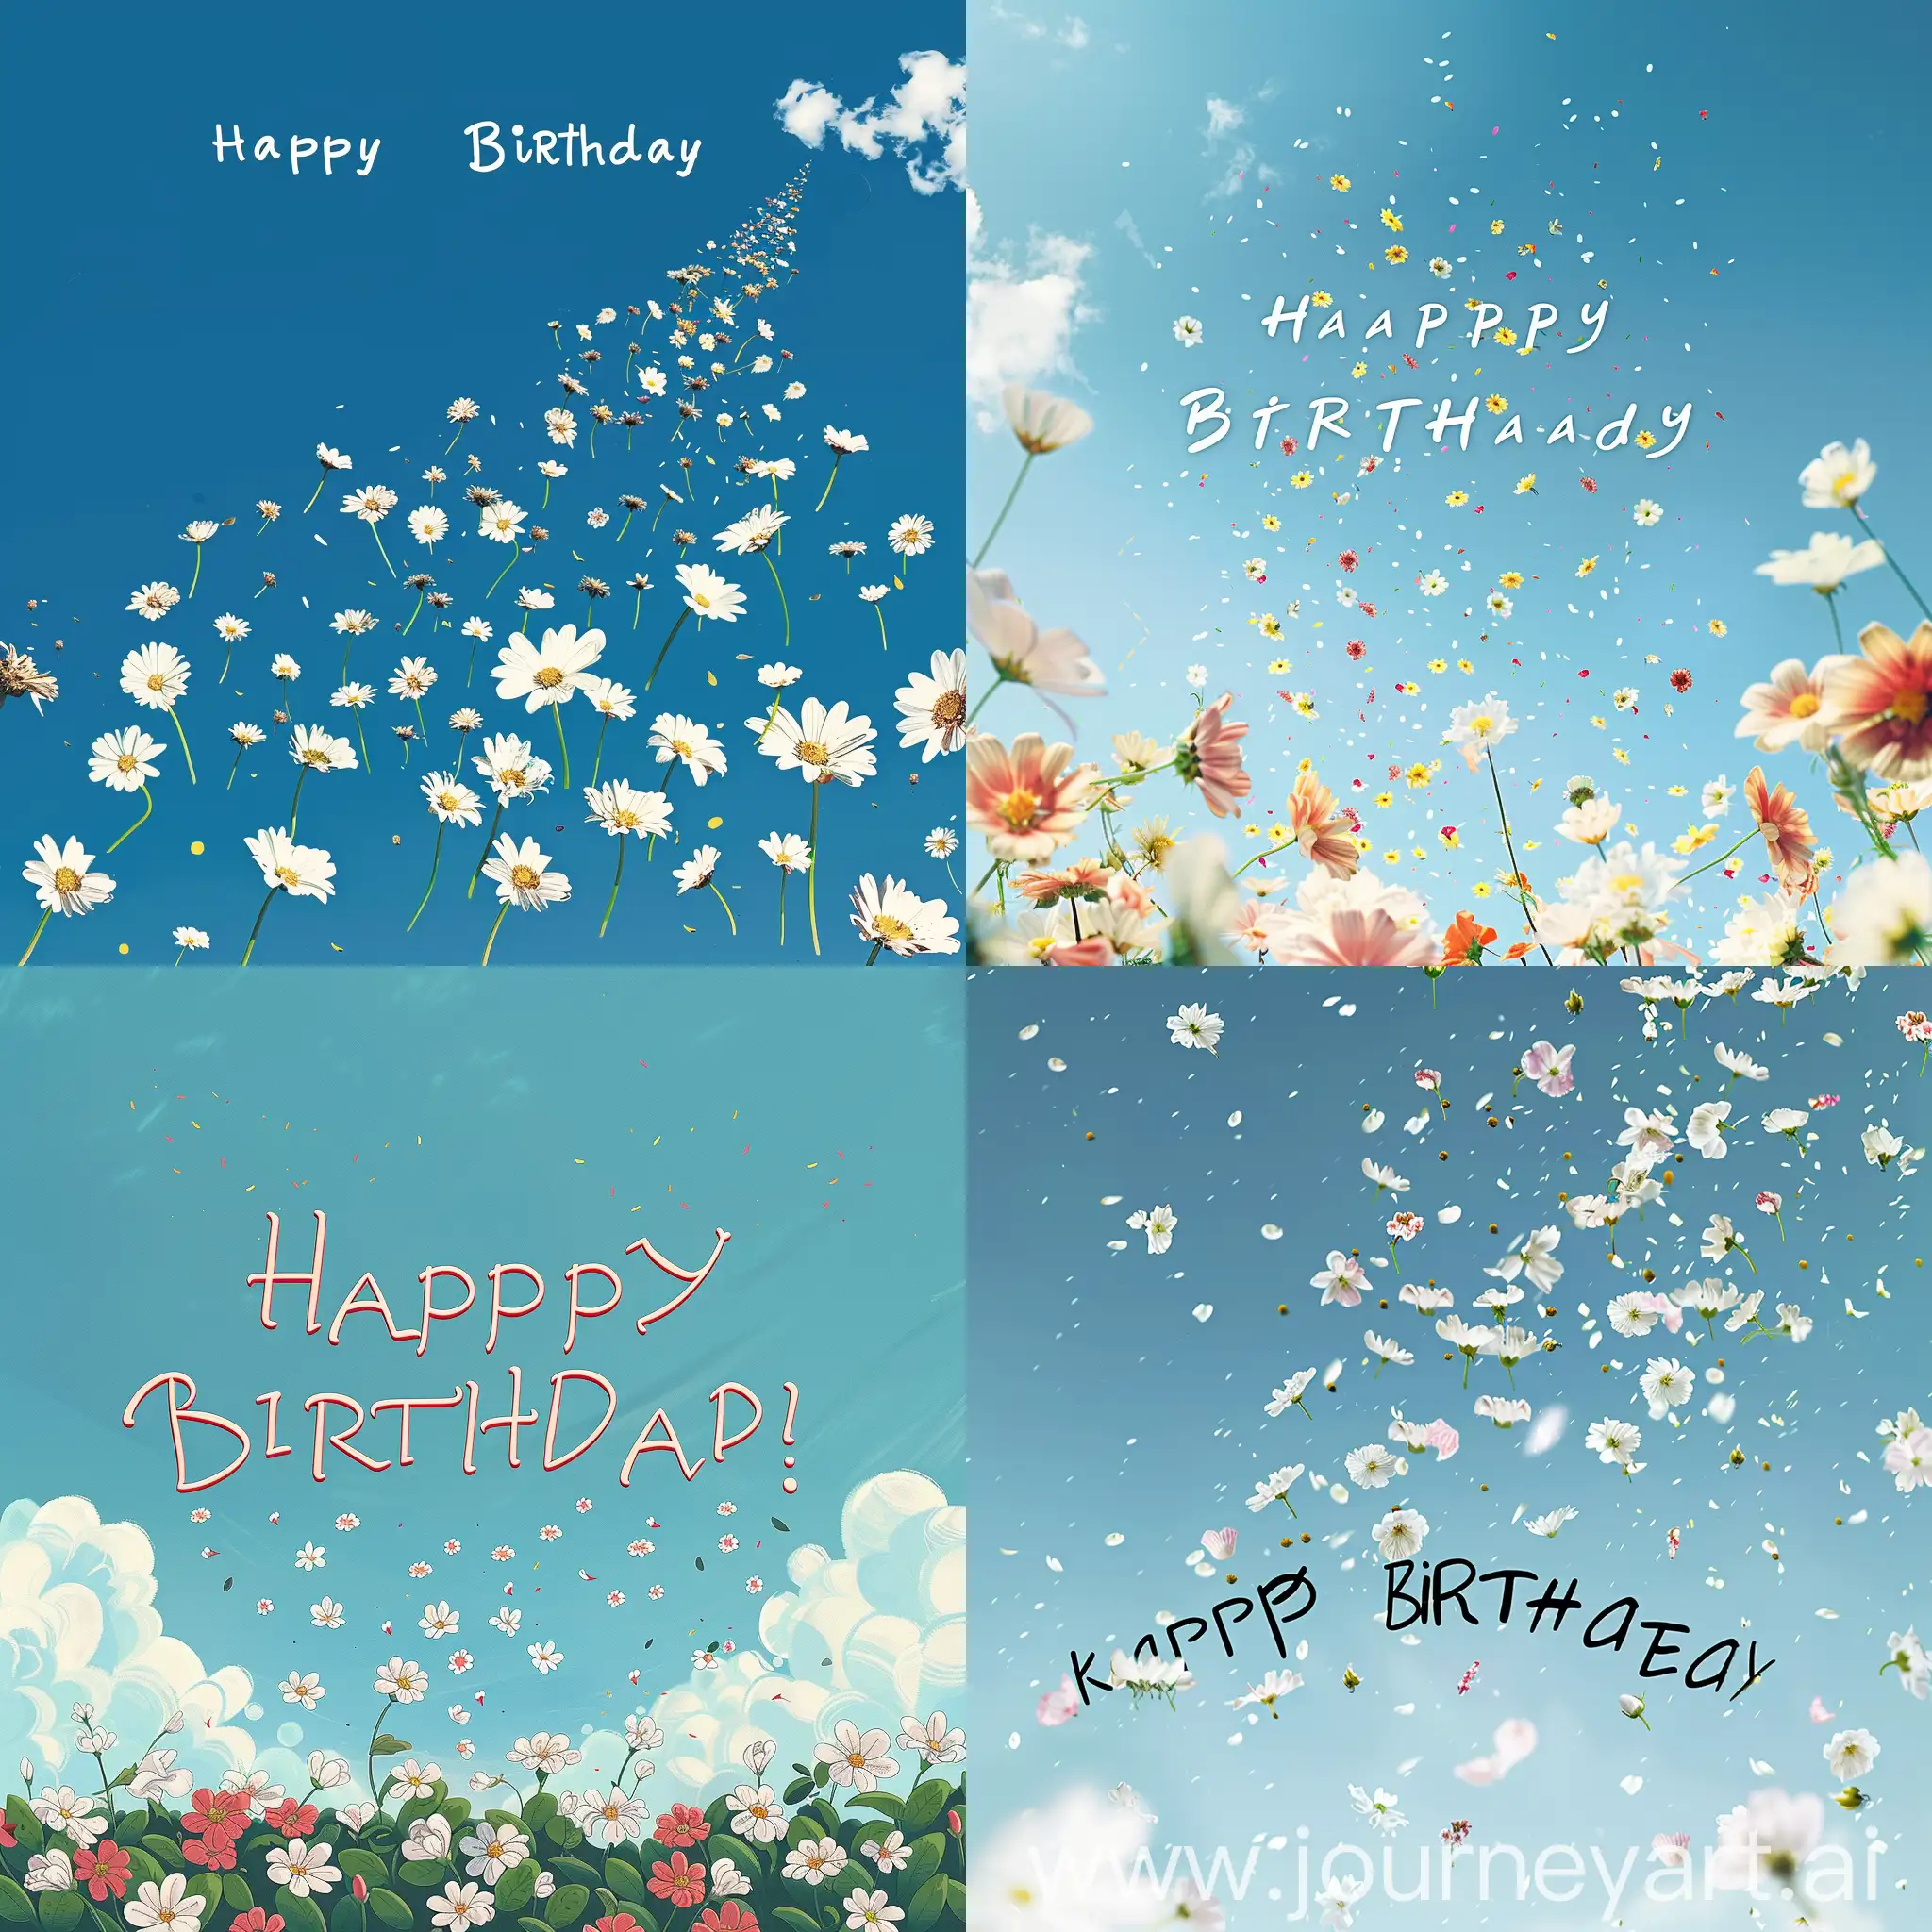 Sinister-Happy-Birthday-Card-with-Falling-Flowers-under-Blue-Sky